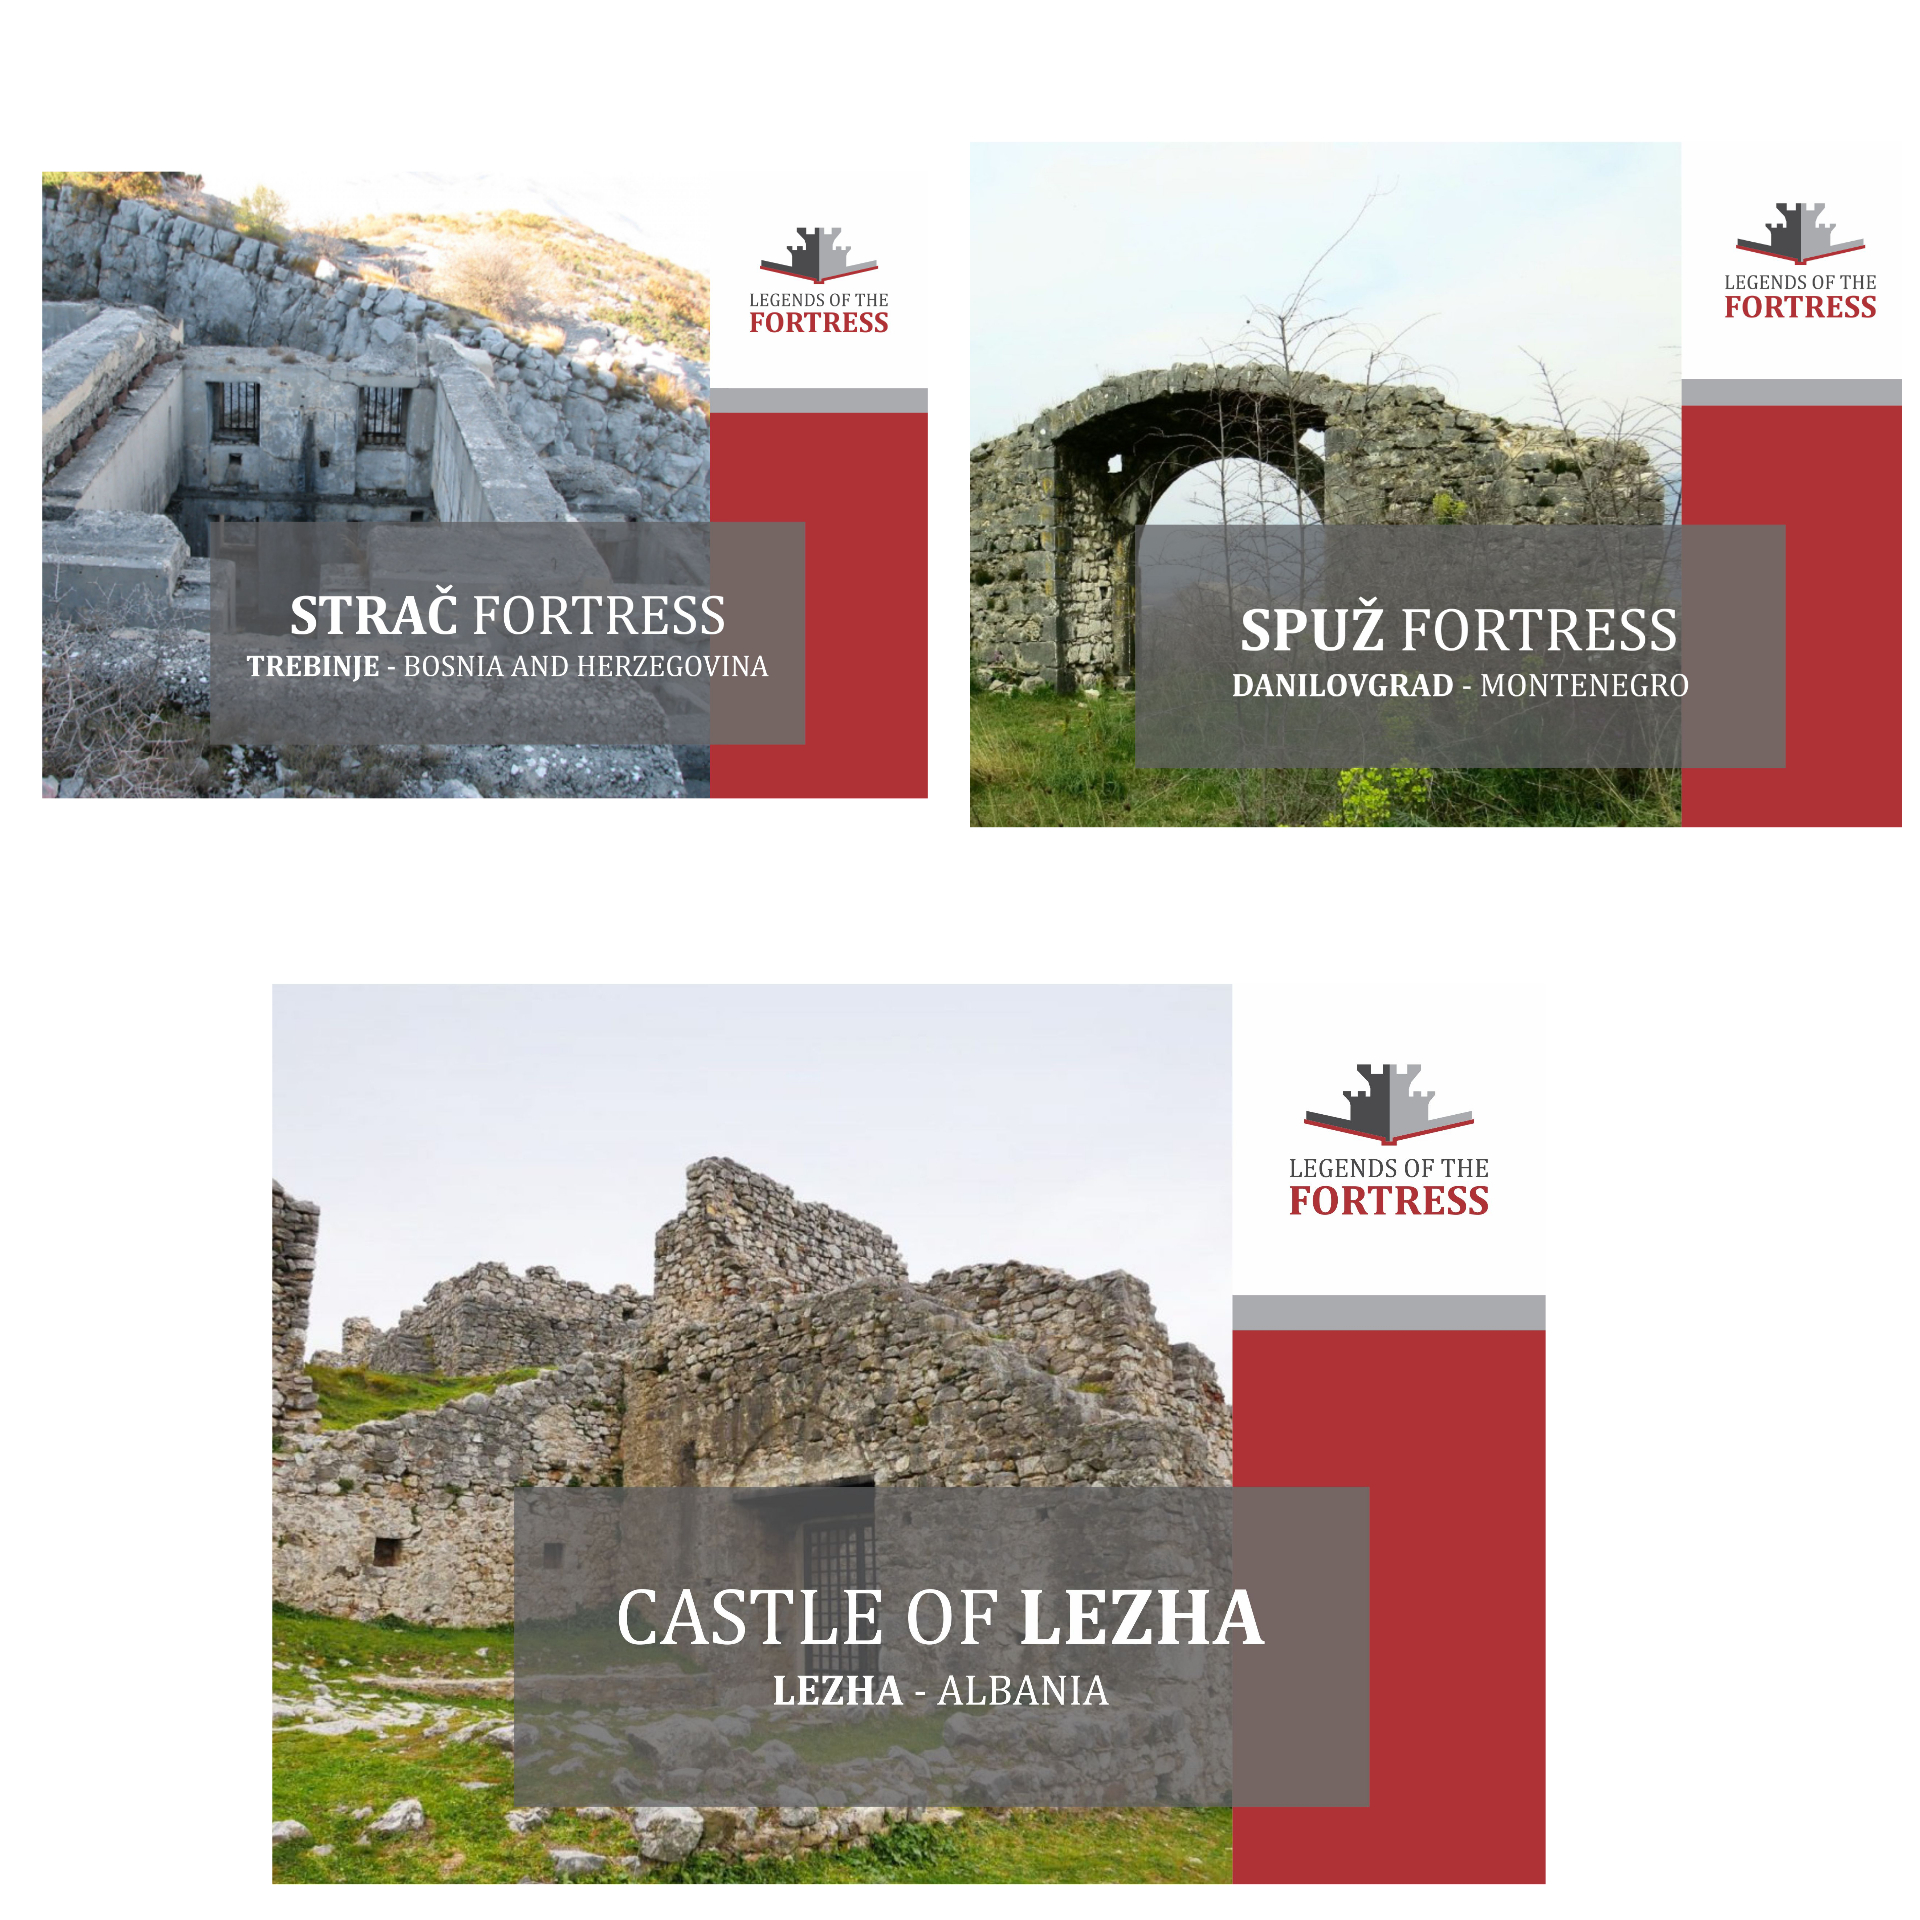 Legends of the Fortress, regional cultural tourism route, includes Caste of Lezhë in Albania, Strač Fortress in Bosnia and Herzegovina, and Spuž Fortress in Montenegro (Photo: Danilovgrad Municipality)